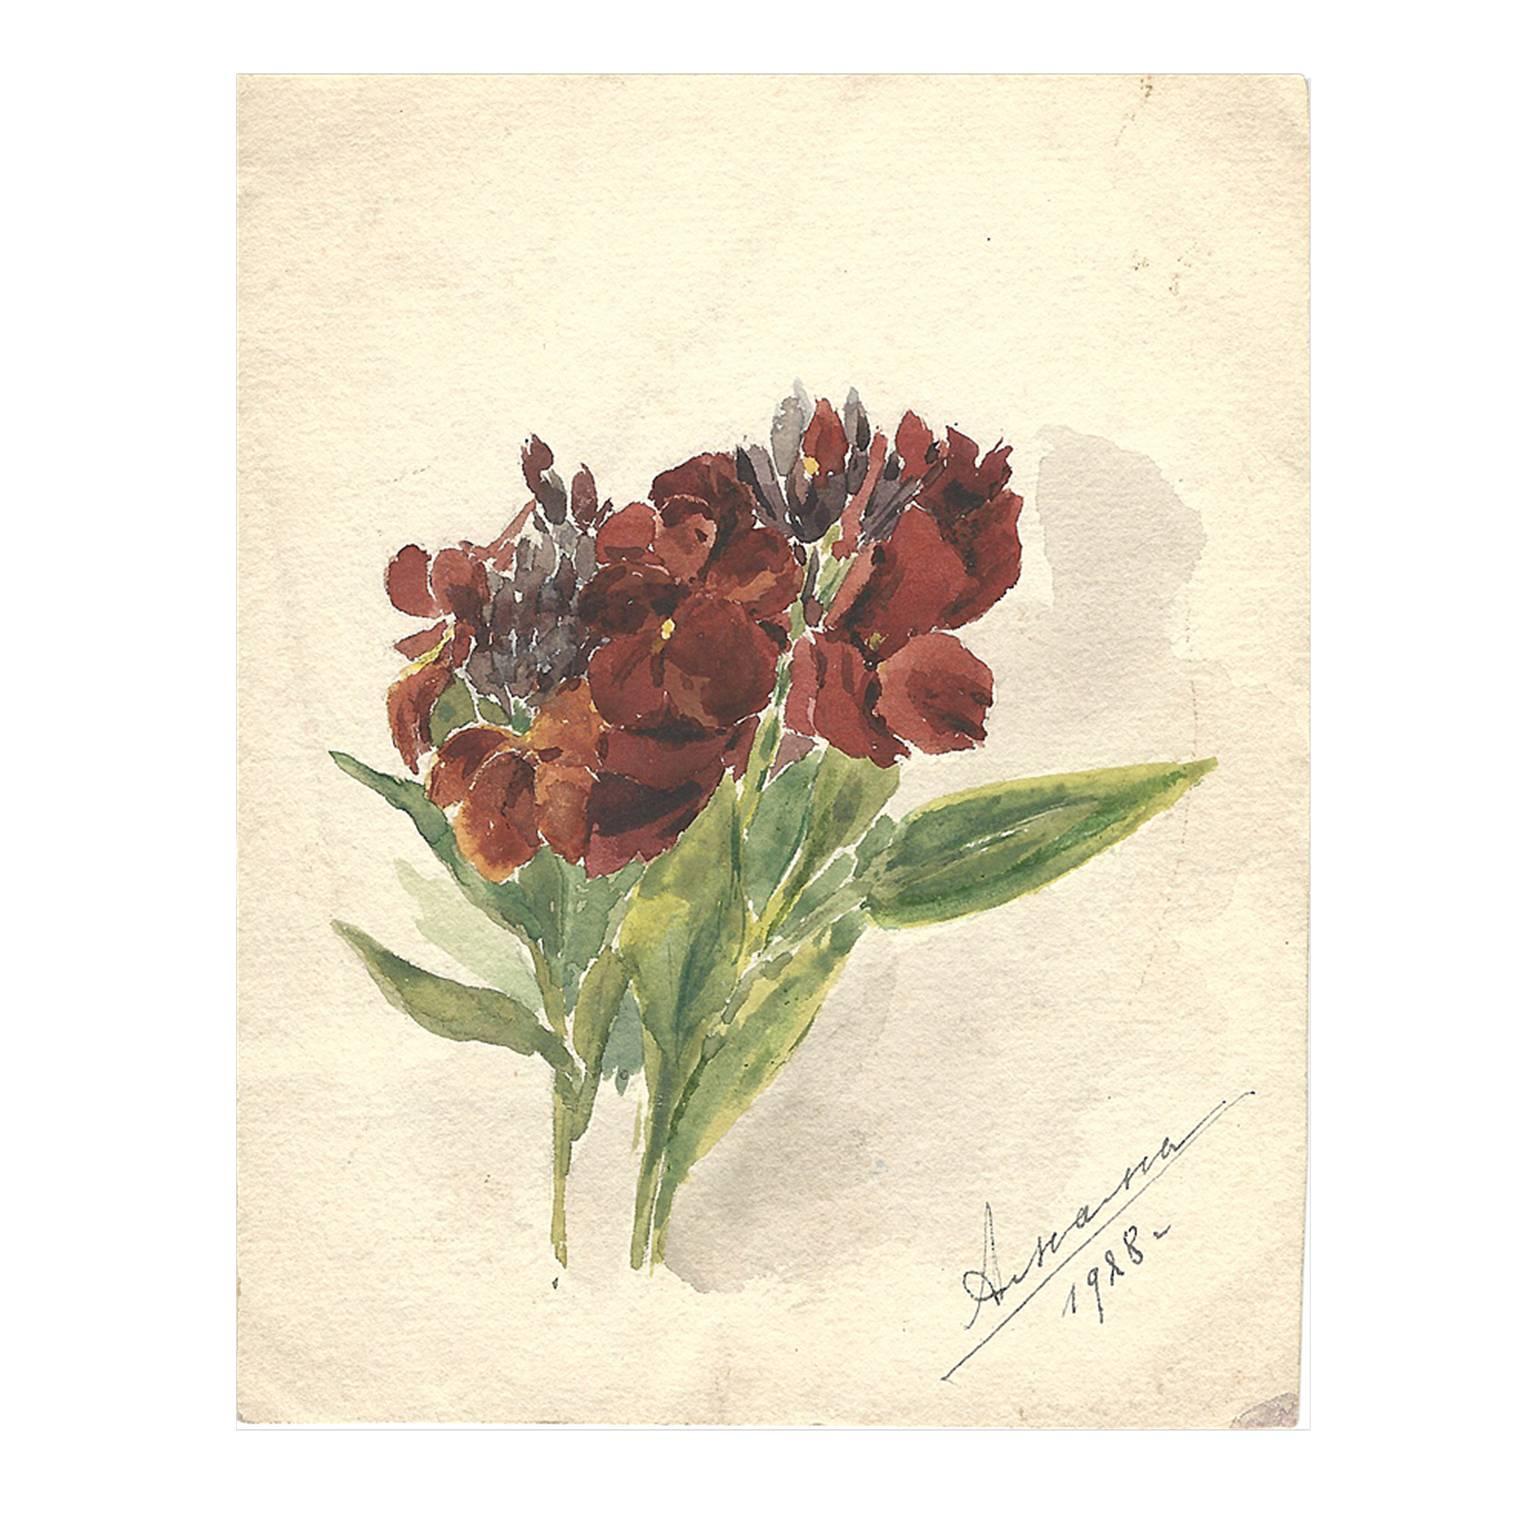 Signed Watercolor of a Bouquet by Grand Duchess Xenia Alexandrovna of Russia